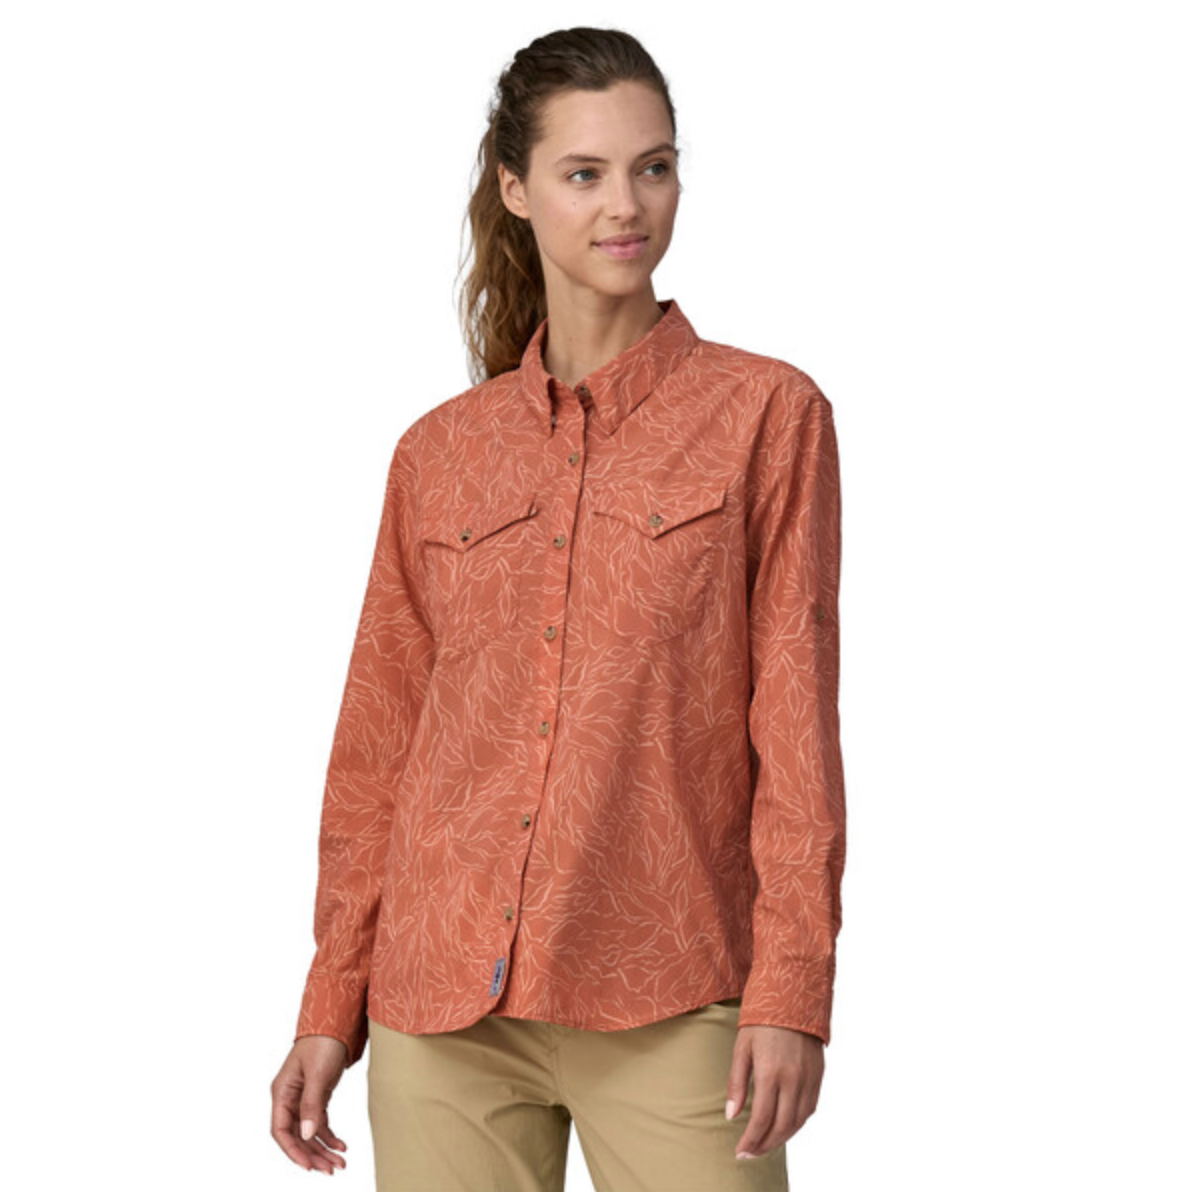 Patagonia Women's Long-Sleeved Sun Stretch Shirt - Over Under Water: Sienna Clay